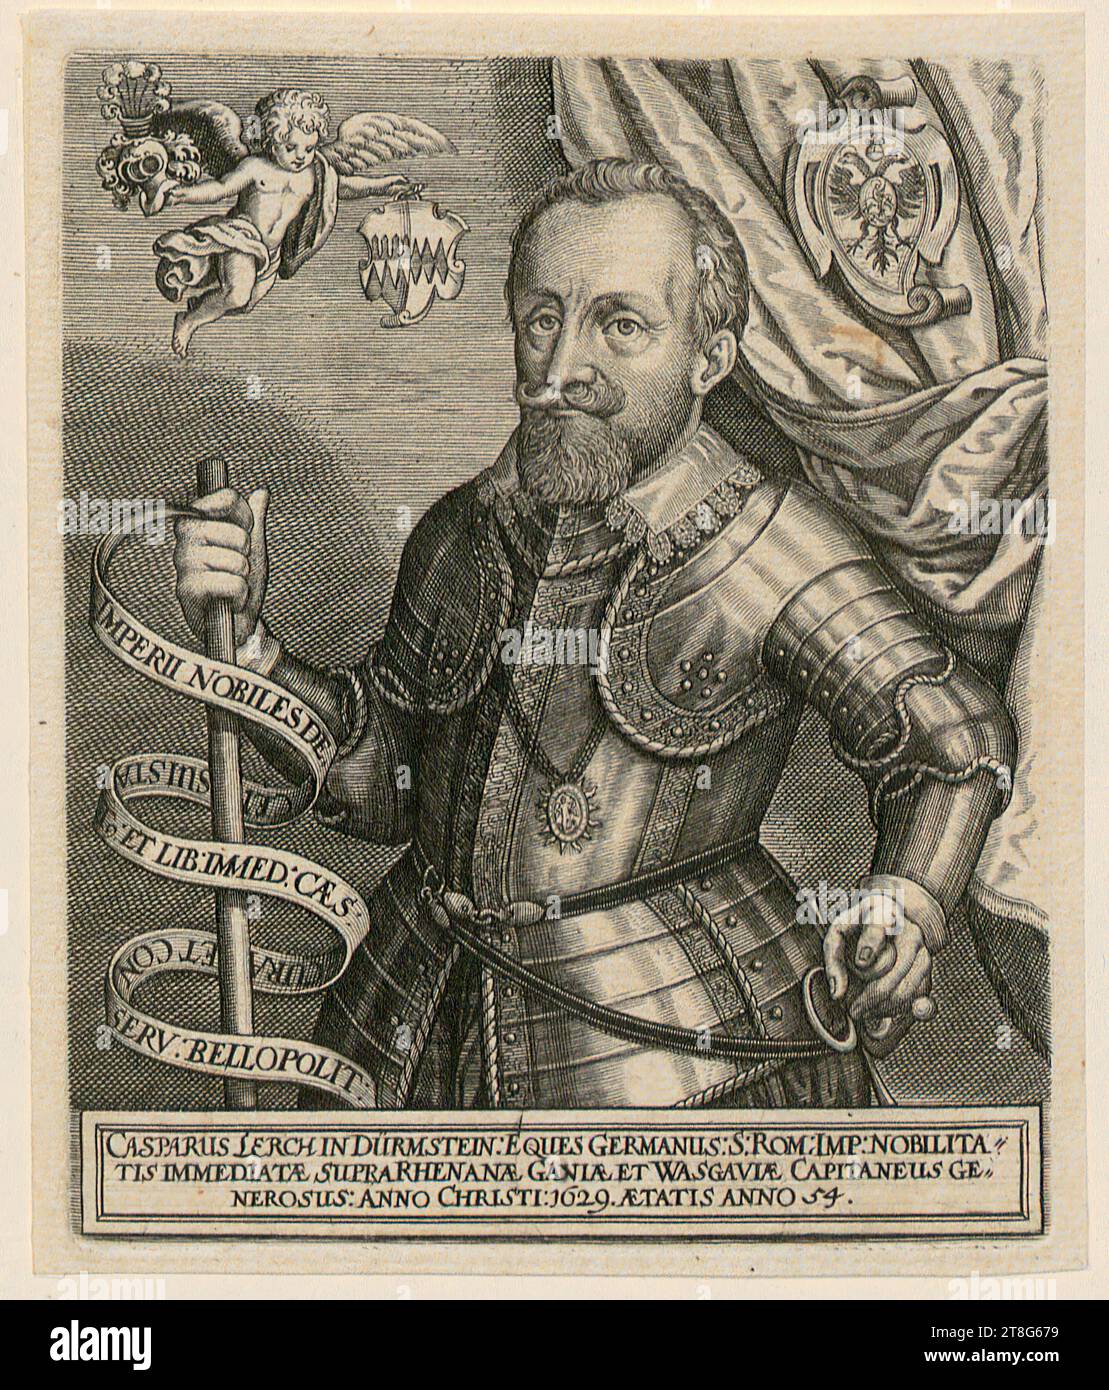 Isaac Brun (1596 - c. 1657), portrait of Caspar Lerch von Dürmstein, print medium: 1629, copperplate engraving, sheet size: 12.4 x 10.3 cm, inscribed in the center left on the inscription band 'IMPERII NOBILES DE ... SERV: BELLOPOLIT:' and at the bottom on Ta Stock Photo